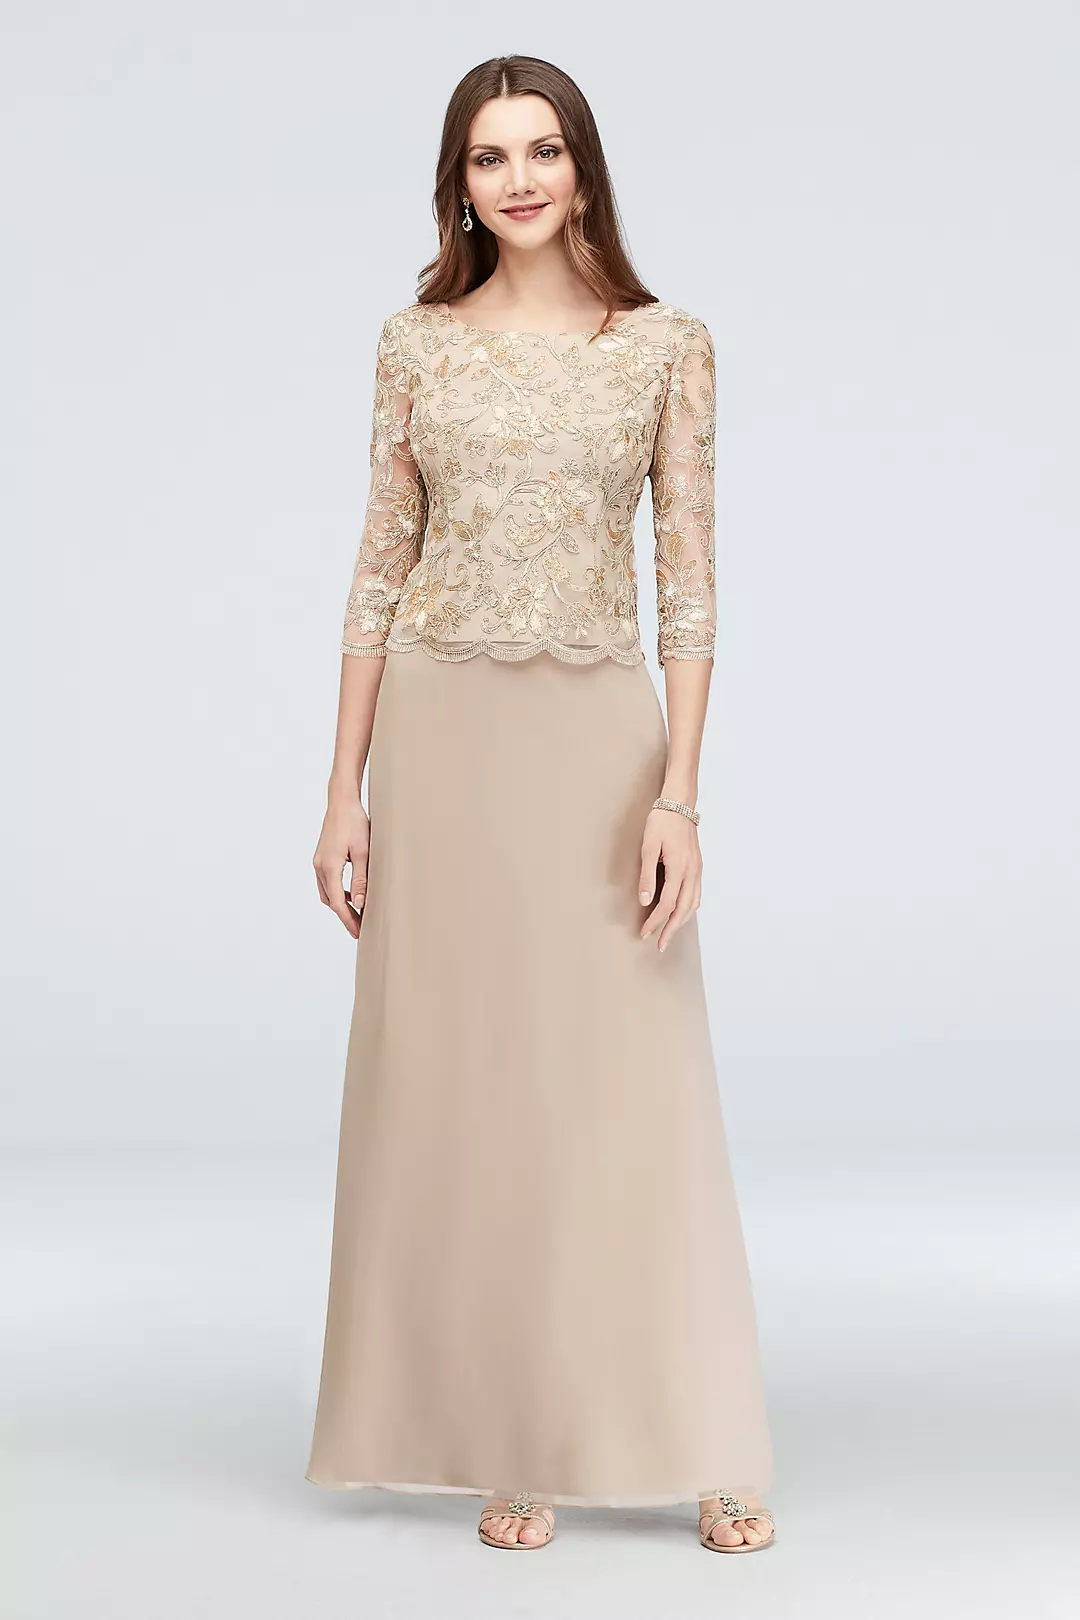 Filigree Lace and Tulle Long Soft Petite Gown Image